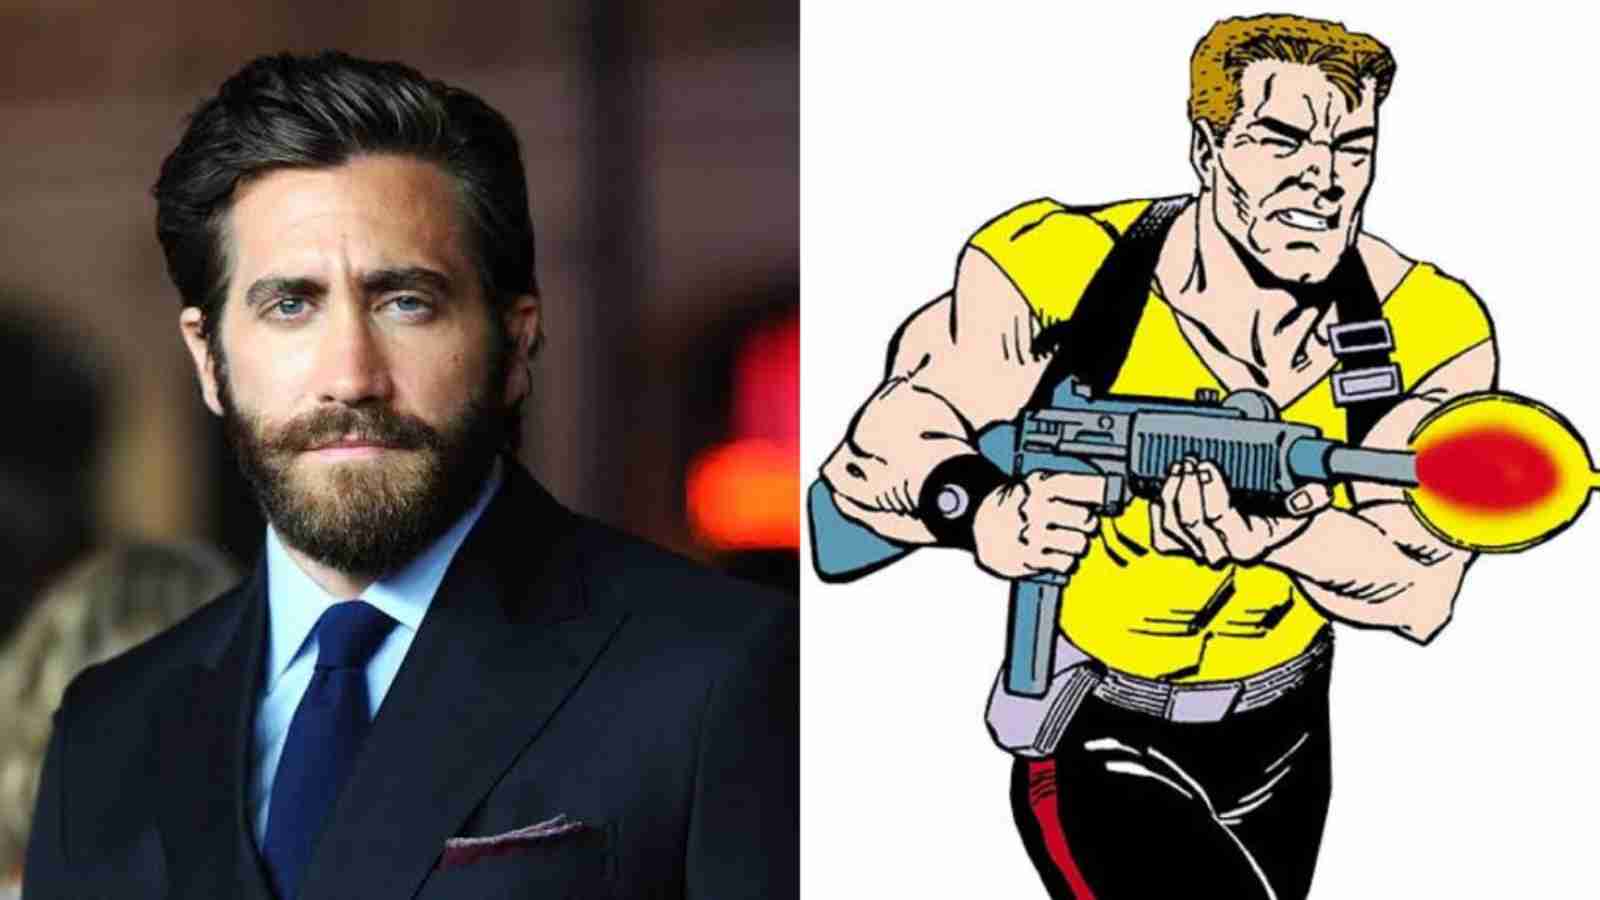 Jake Gyllenhaal was offered an anti-hero role in Suicide Squad